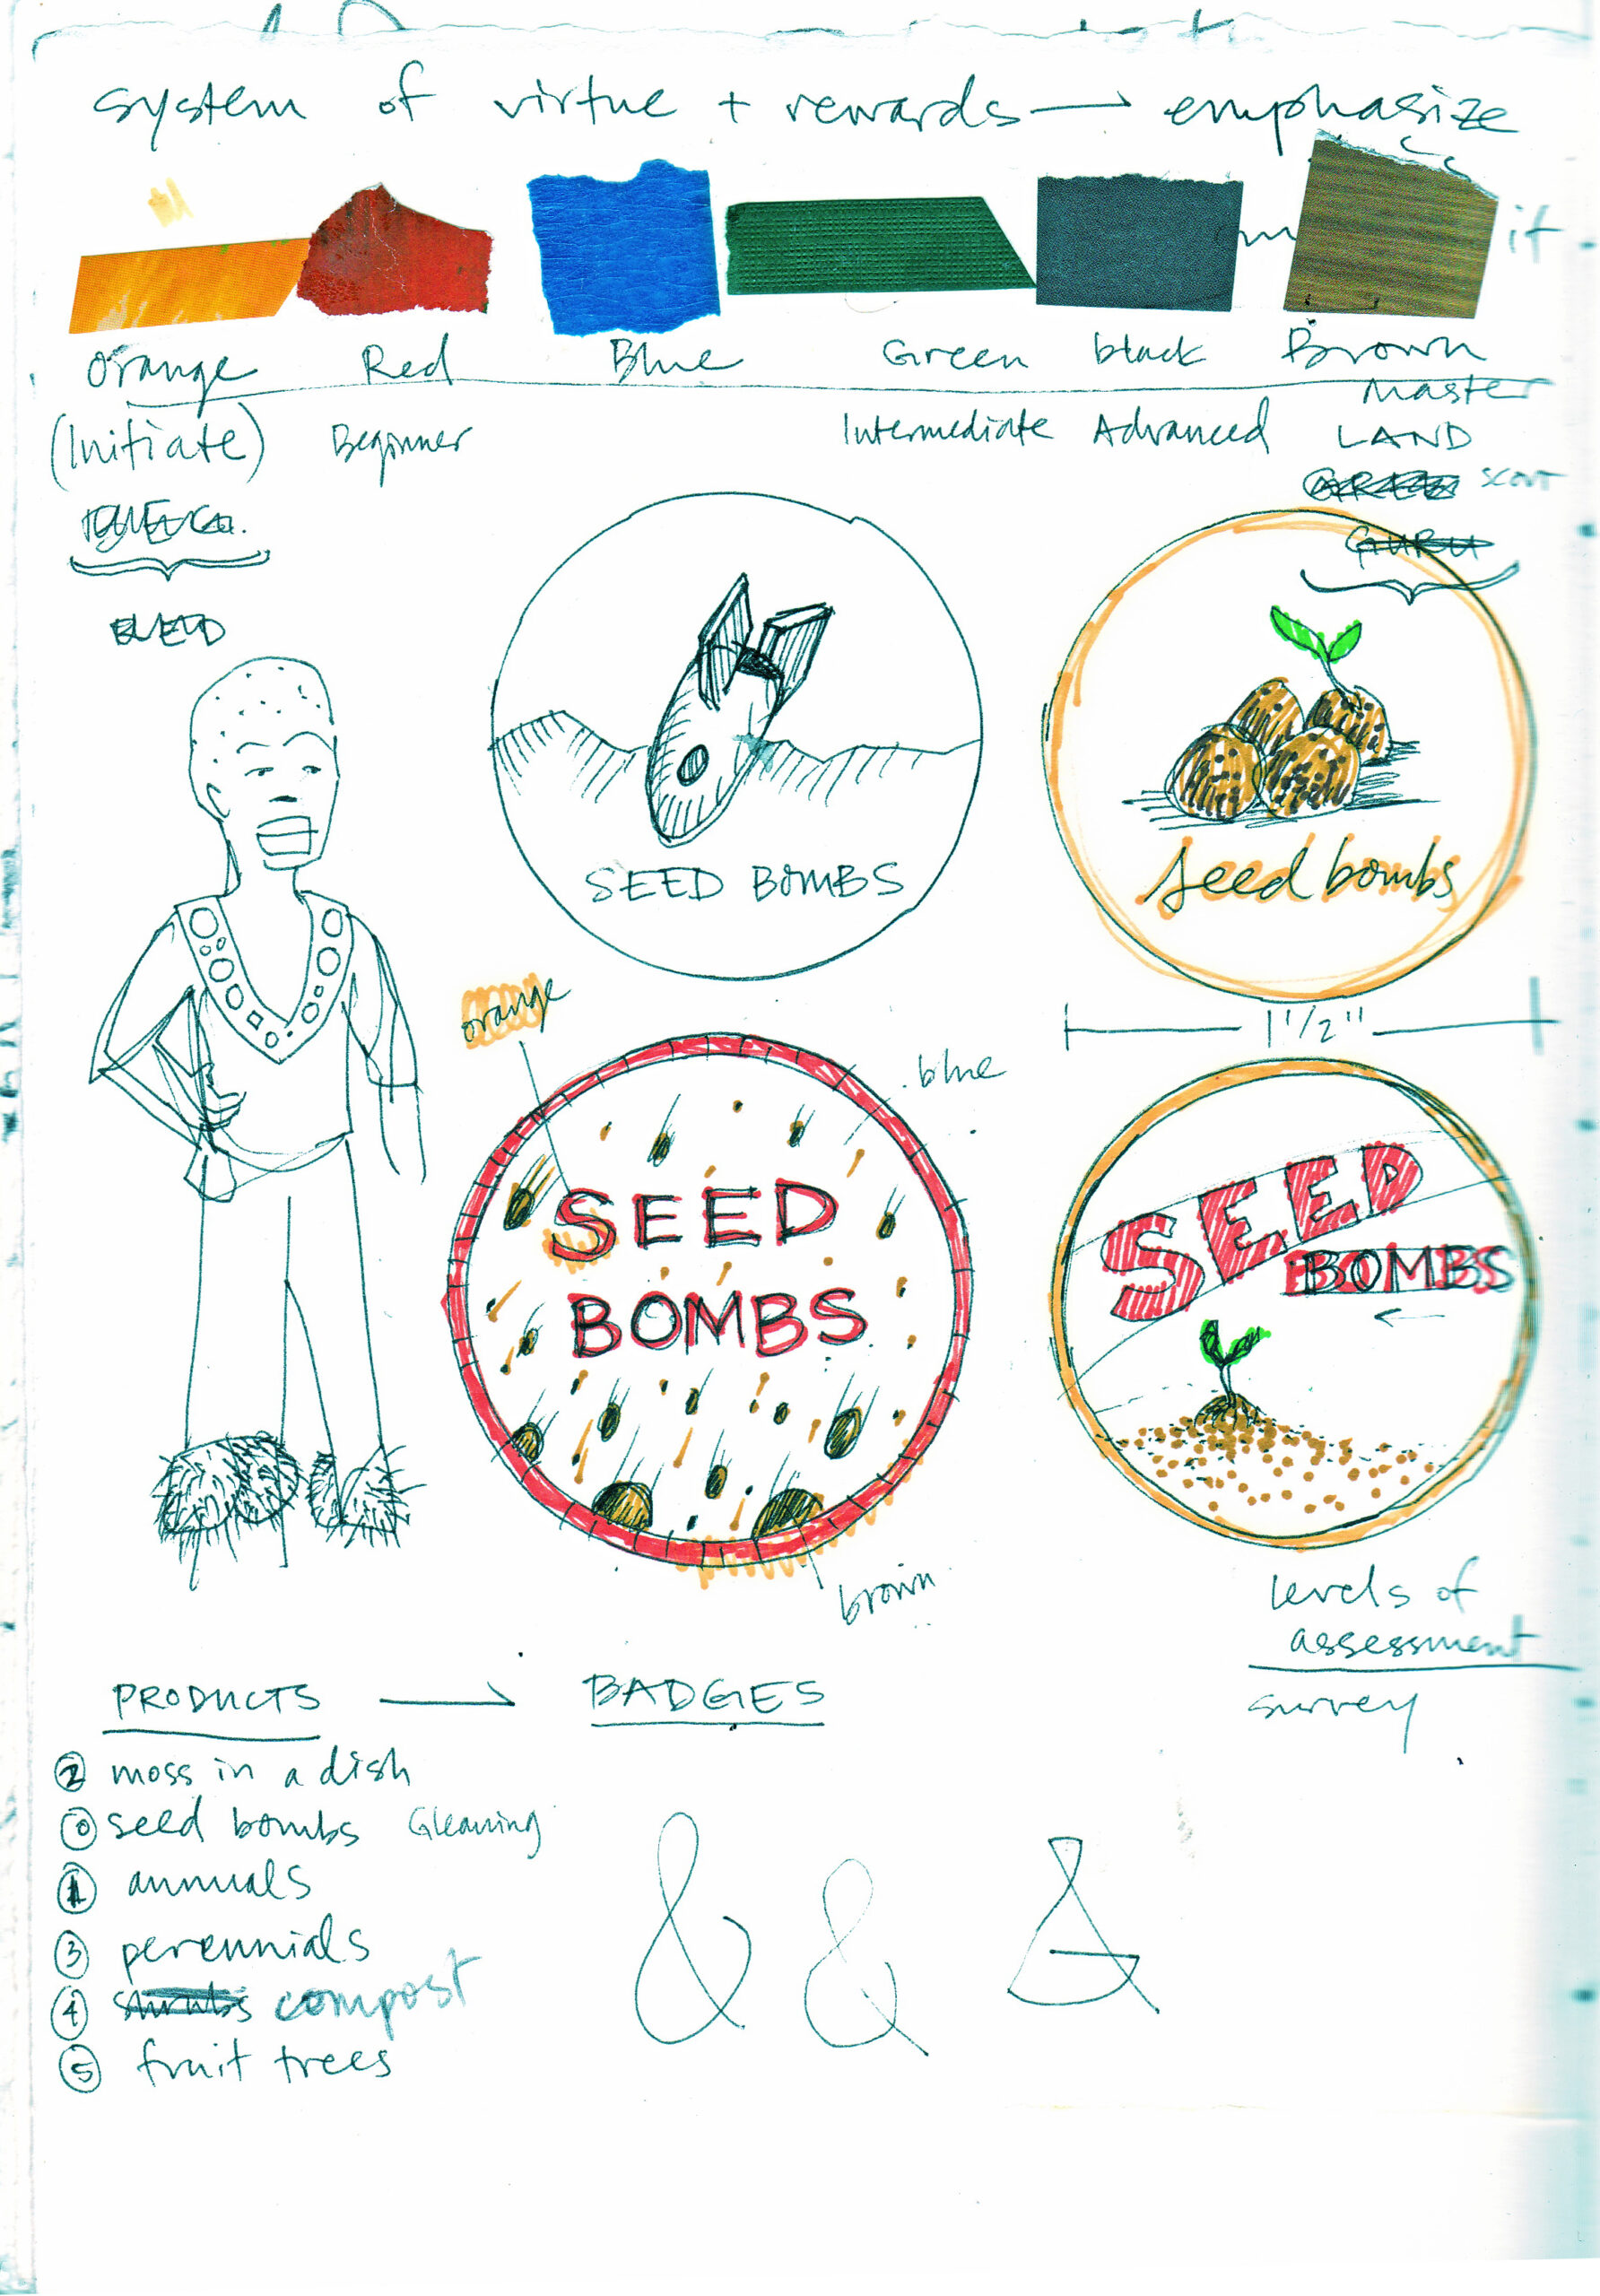 An image of sketches on paper showing seed bombs and color swatches